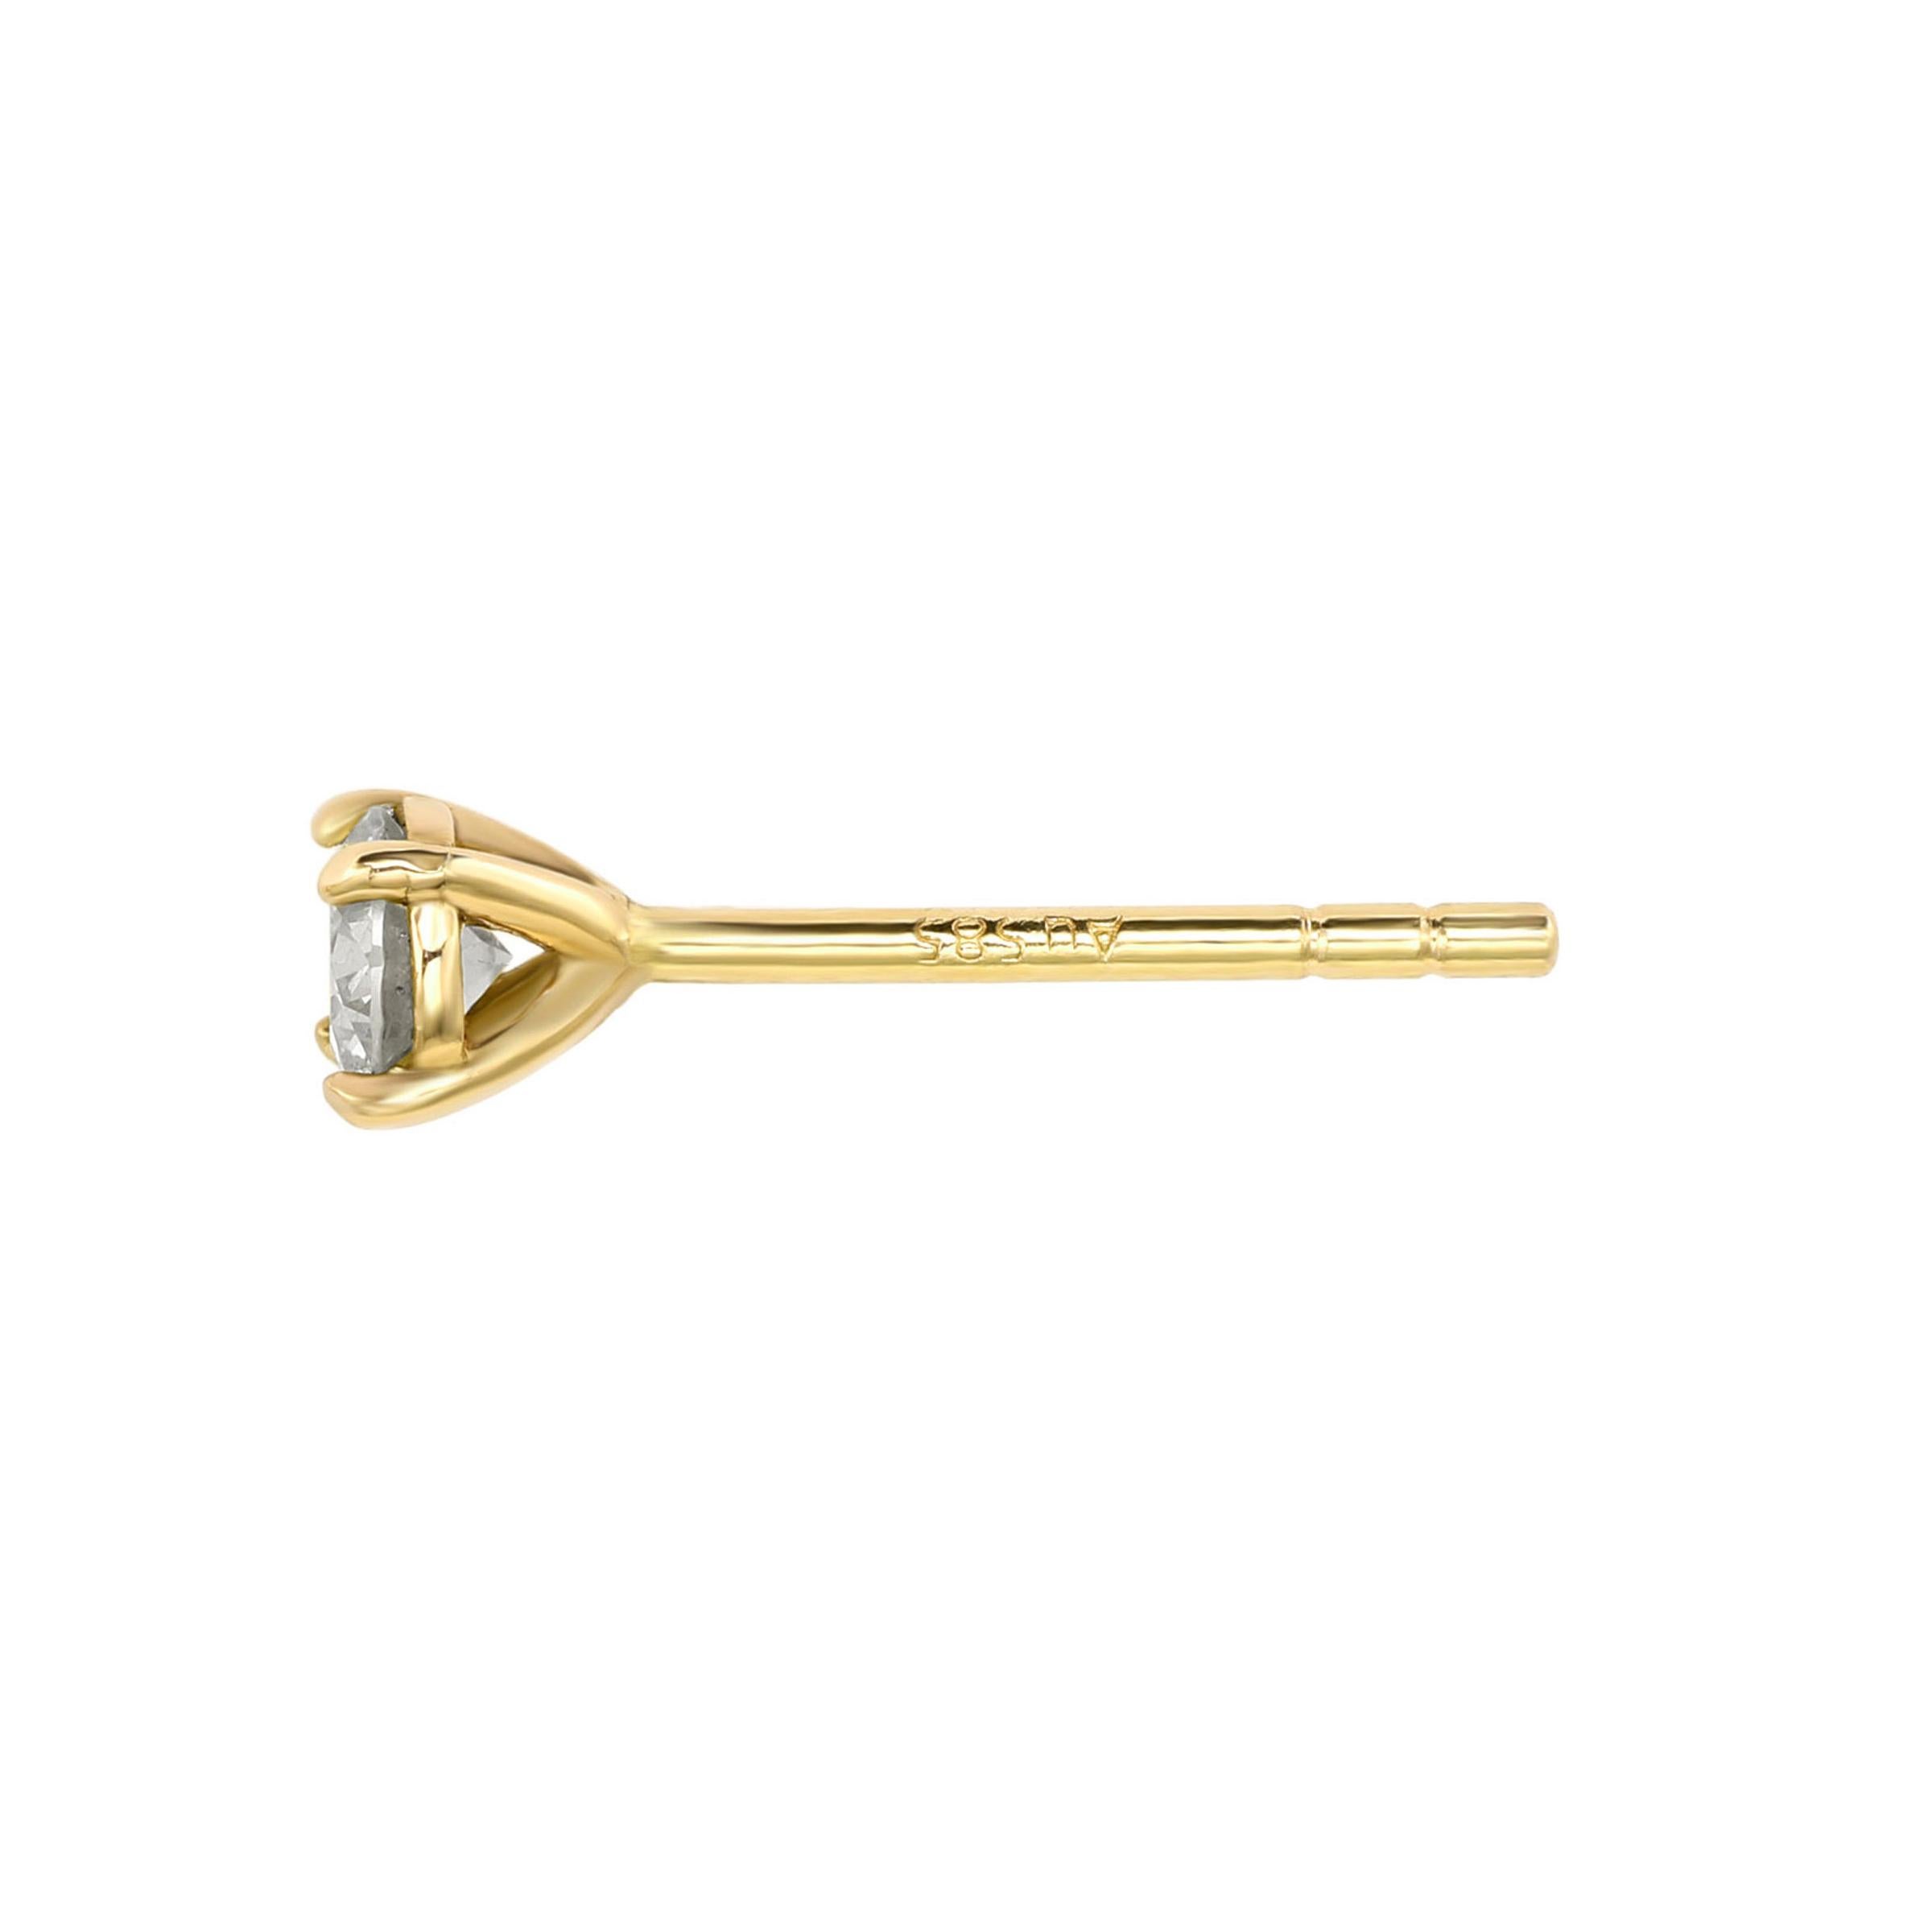 Perfect as a second or third piercing. Add an elegant accent to your outfit with this sparkling stud earring featuring one gorgeous white diamond in a prong setting. Crafted in 14-karat yellow gold, this earring has a high polish finish and